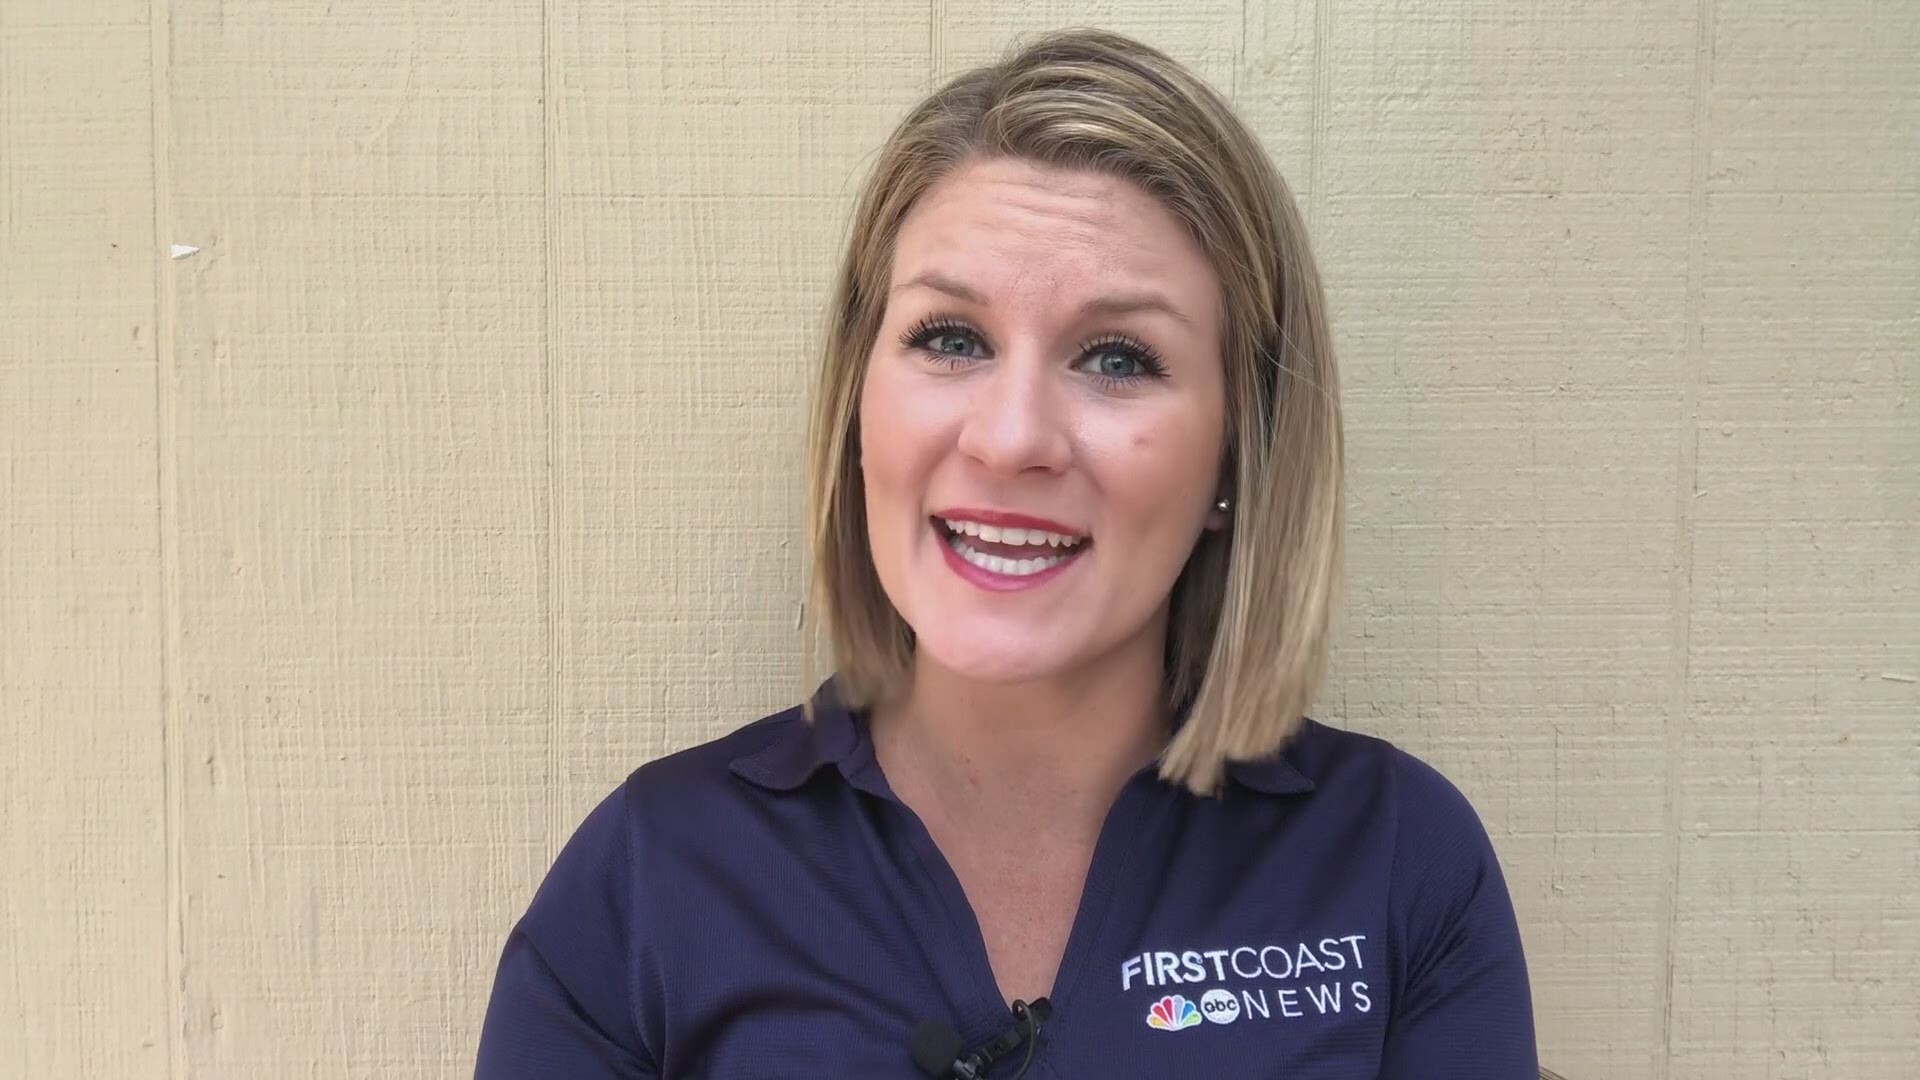 The First Coast News app is very handy, but especially when it comes to tropical forecasting! Meteorologist Lauren Rautenkranz shows us some quick tips.